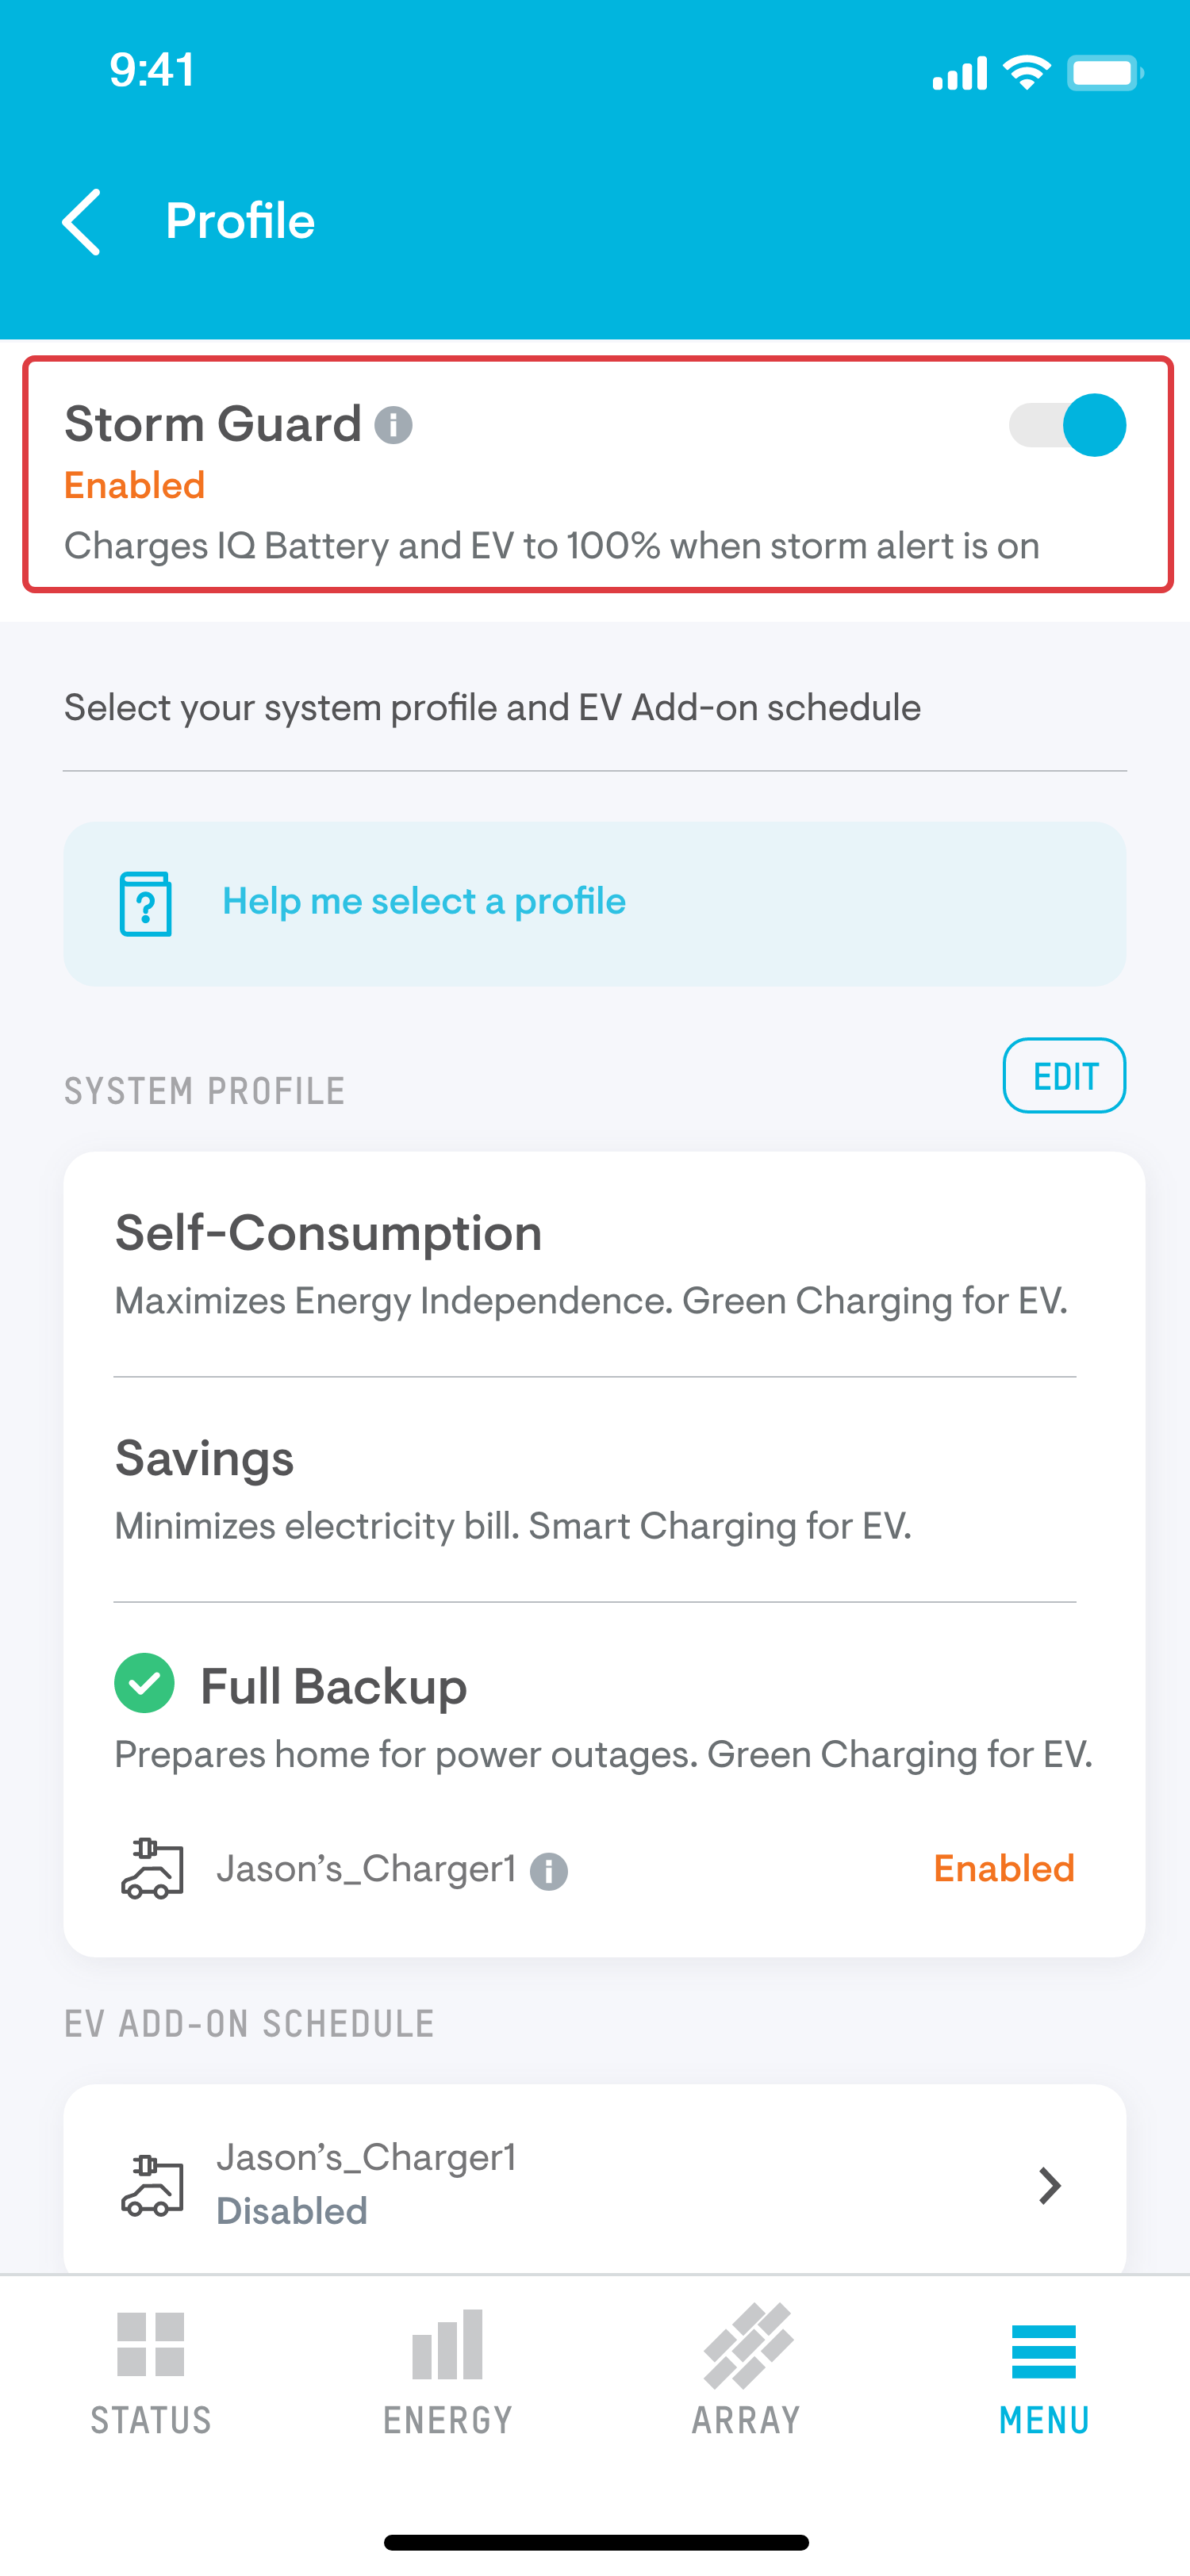 Profile view of the Enphase Energy App - Full Backup